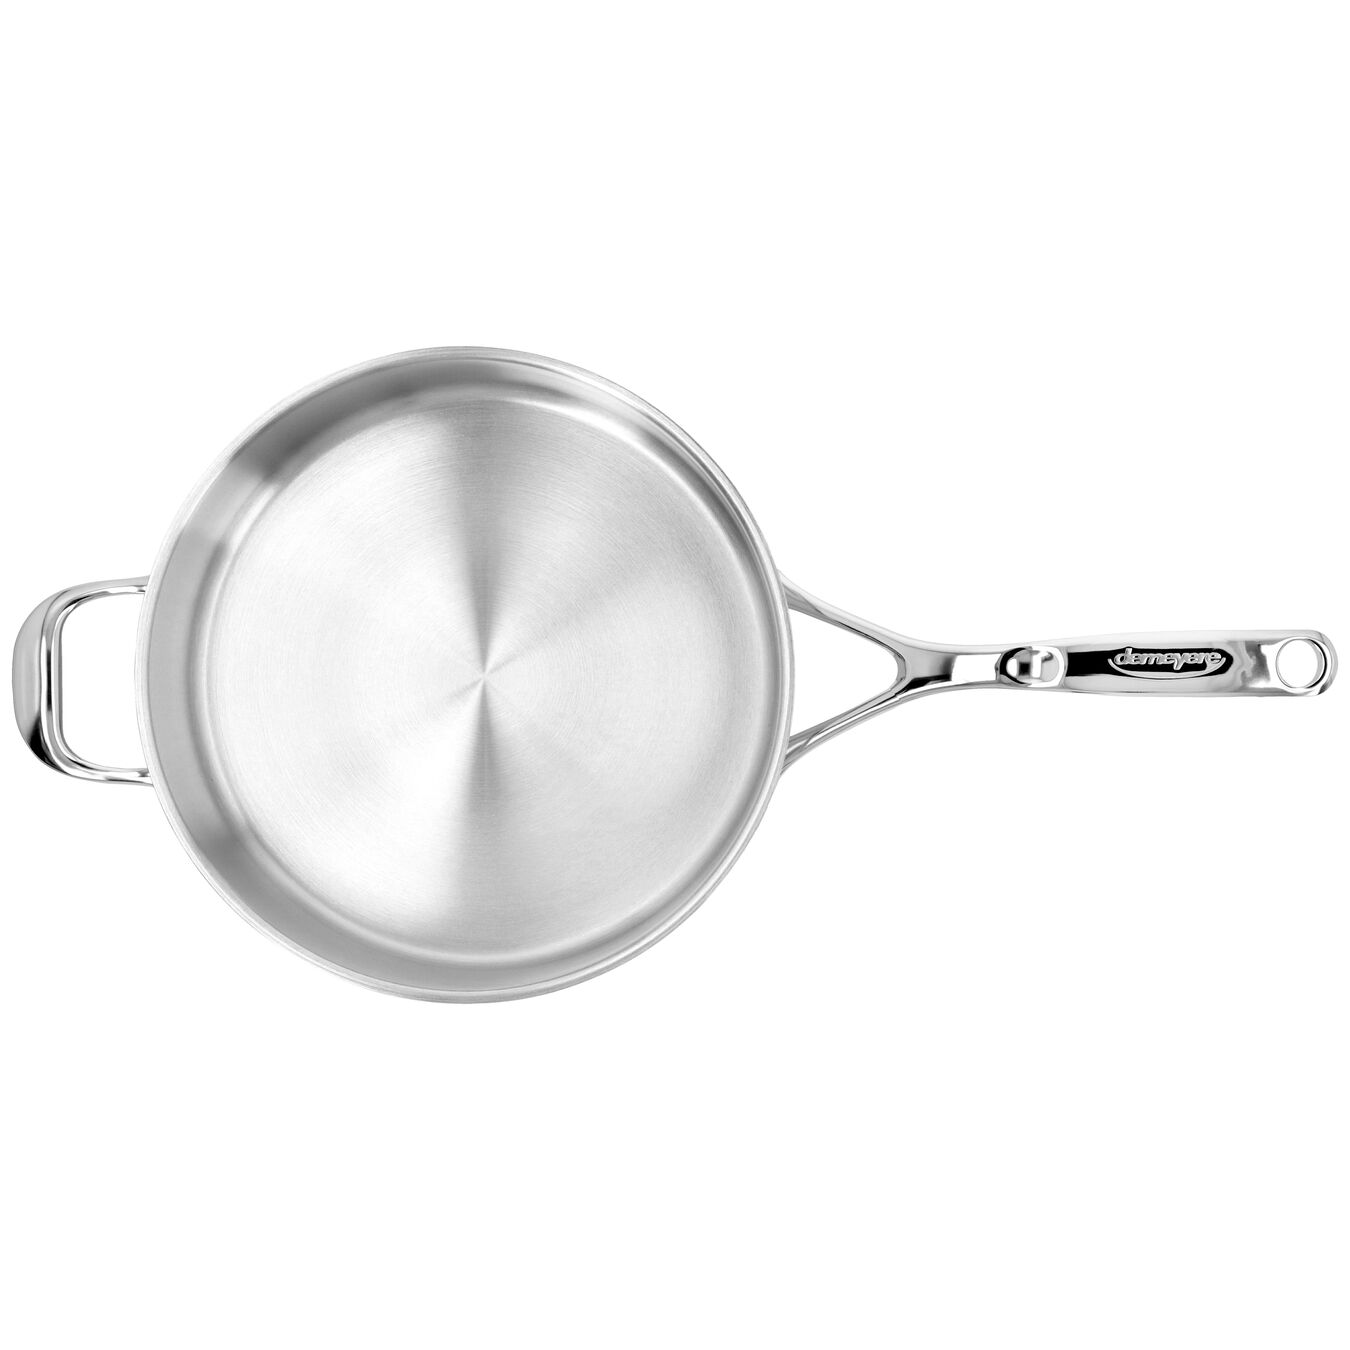 28 cm 18/10 Stainless Steel Saute pan with lid,,large 5